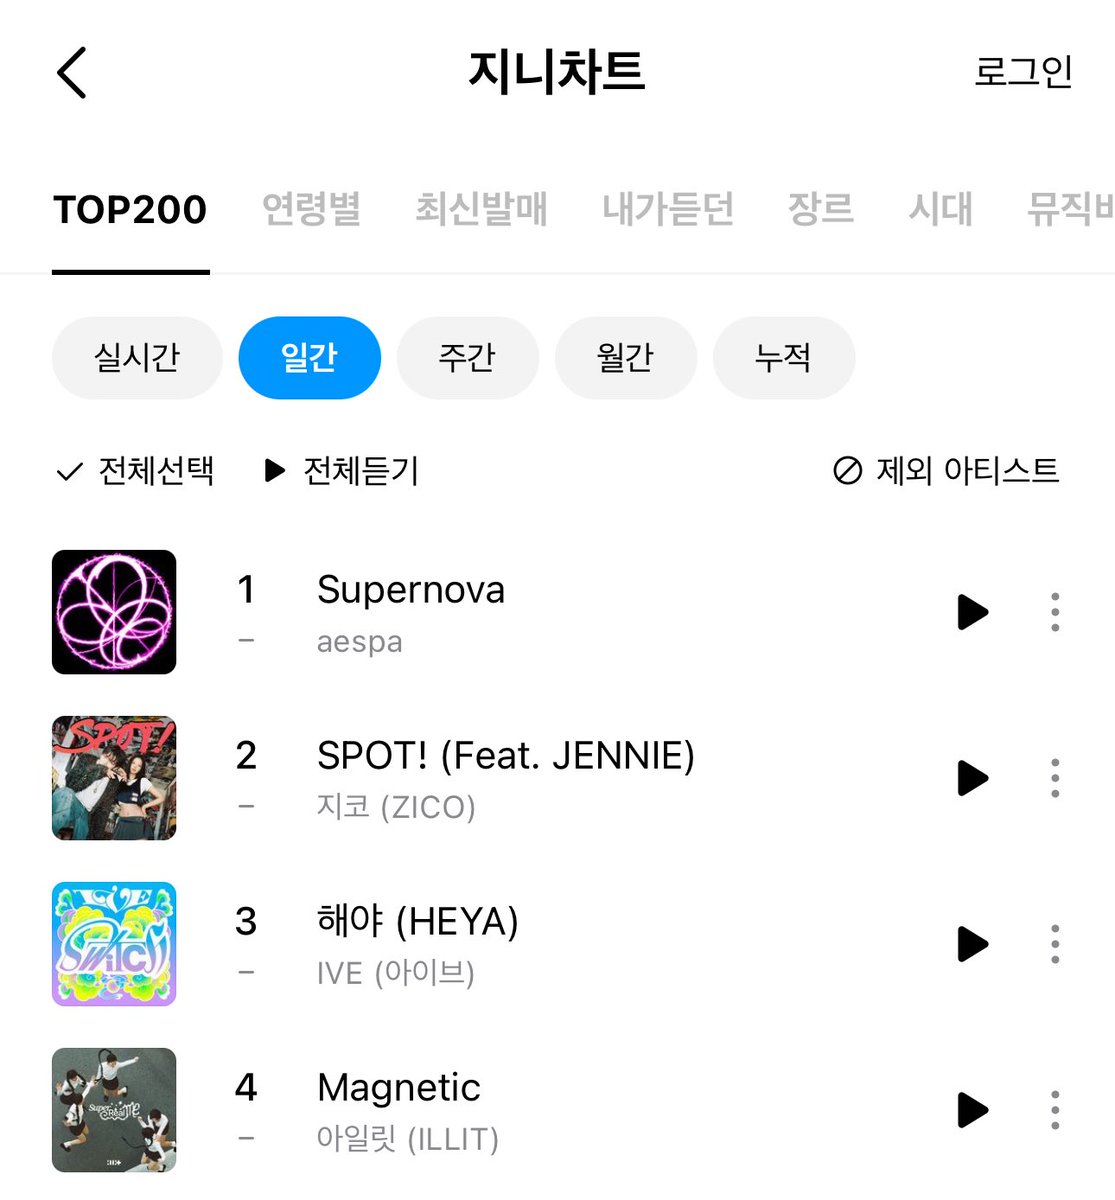 240524 aespa “Supernova” has now spent 2 days at #1 on Genie Daily Chart! #aespa #에스파 @aespa_official